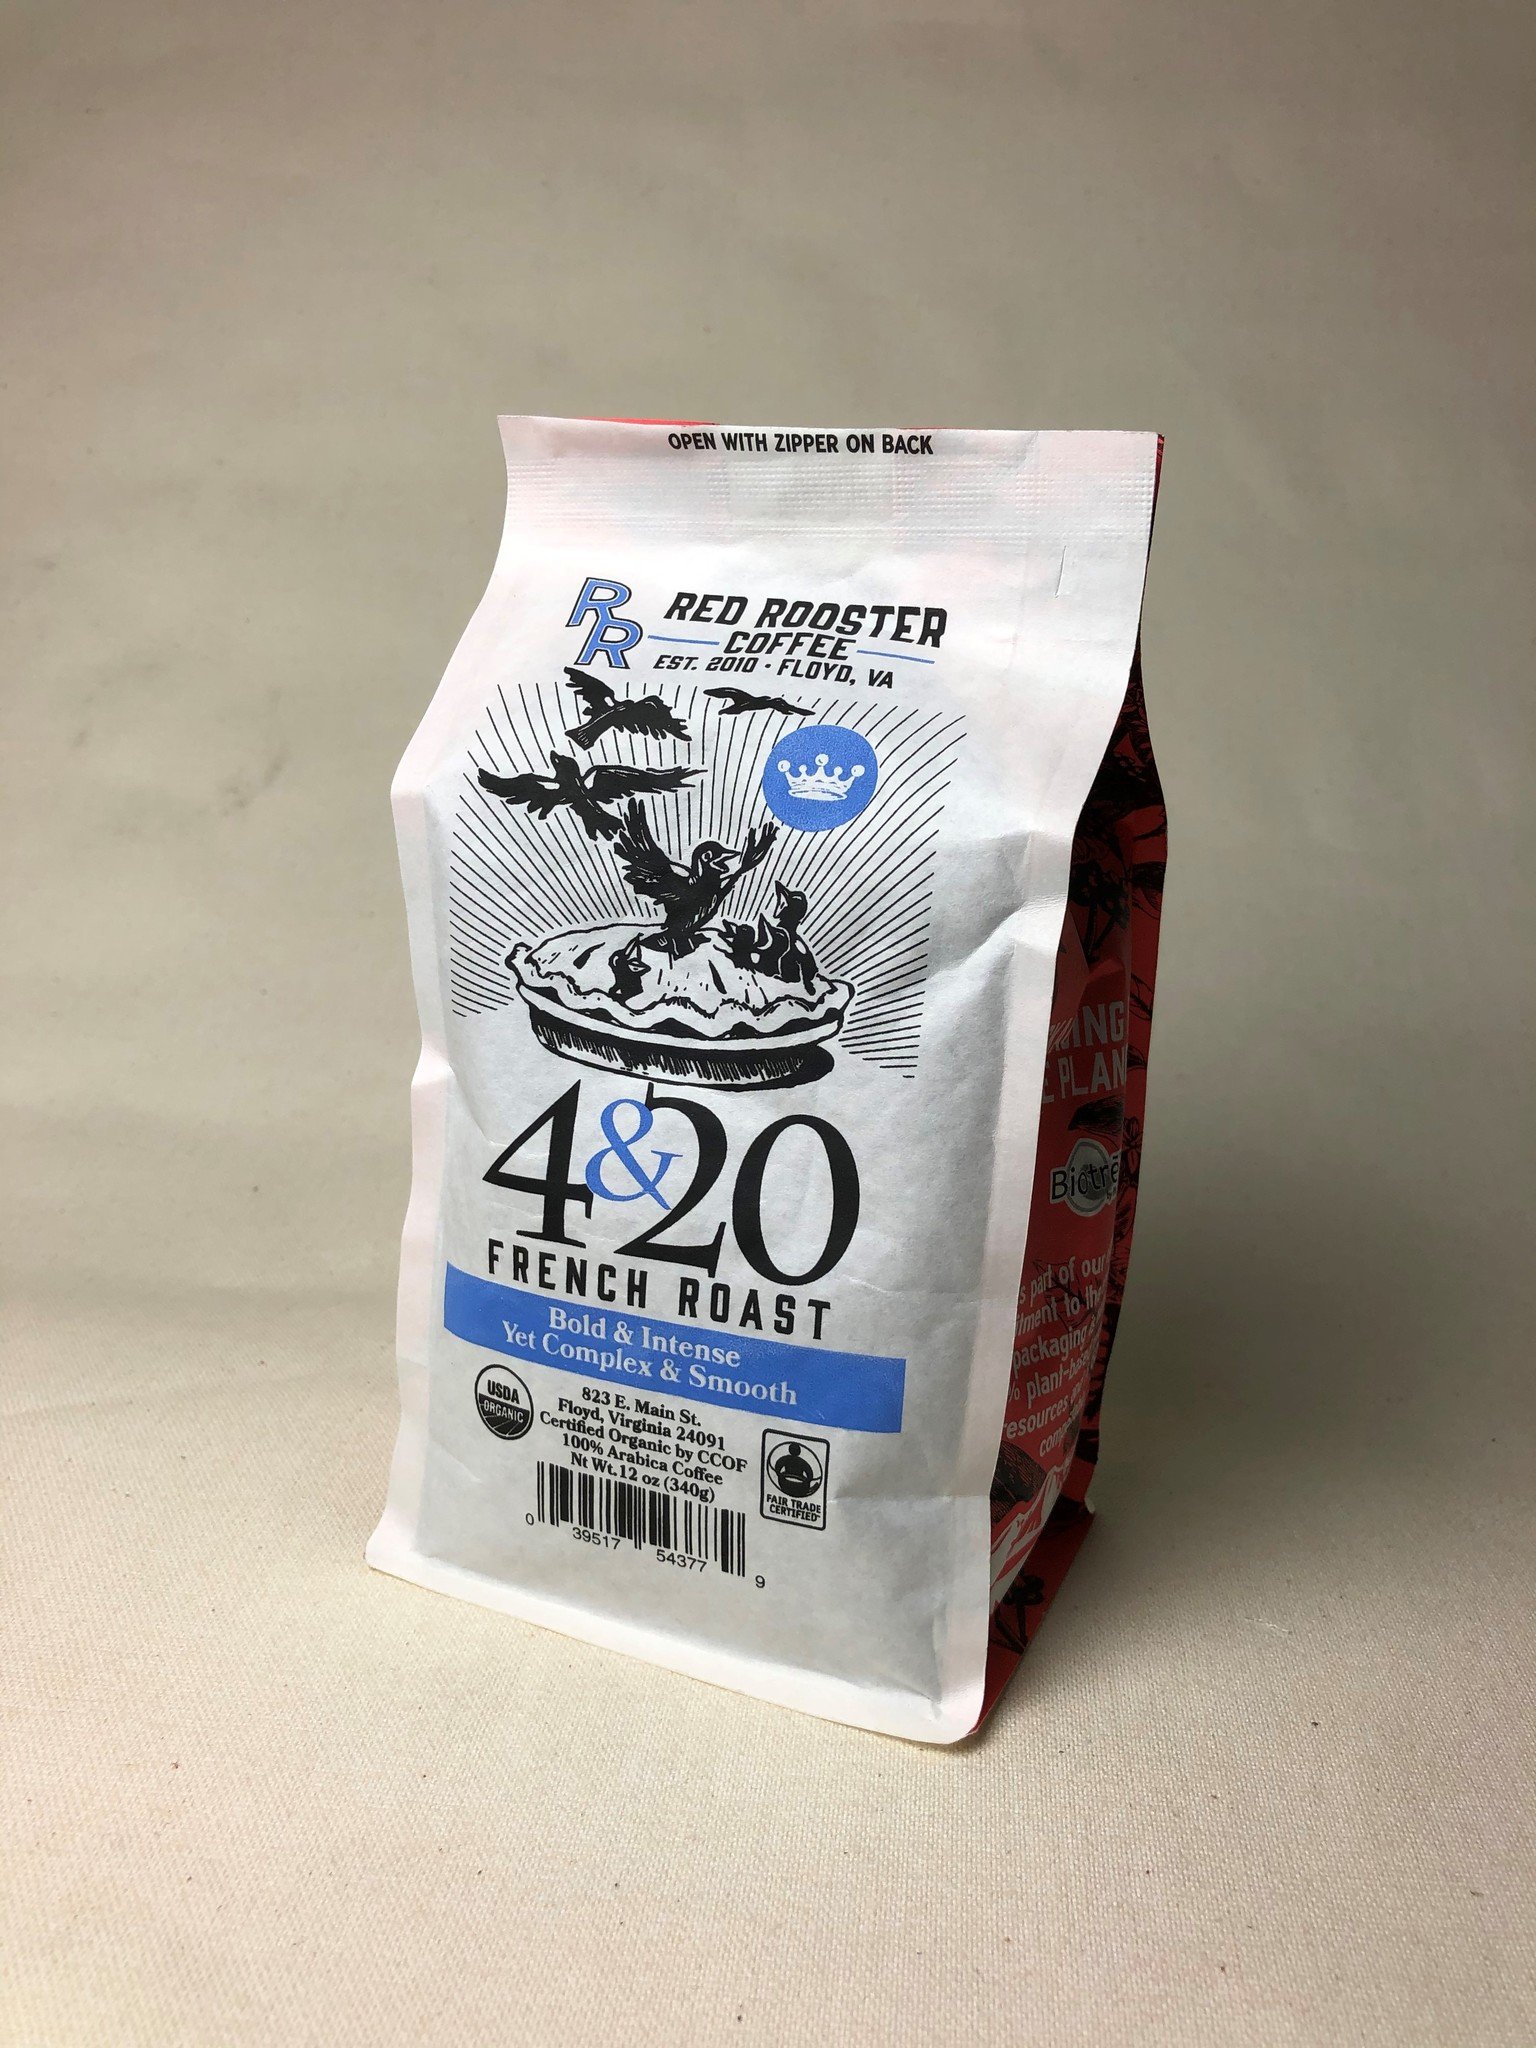 Red Rooster Coffee 4 20 